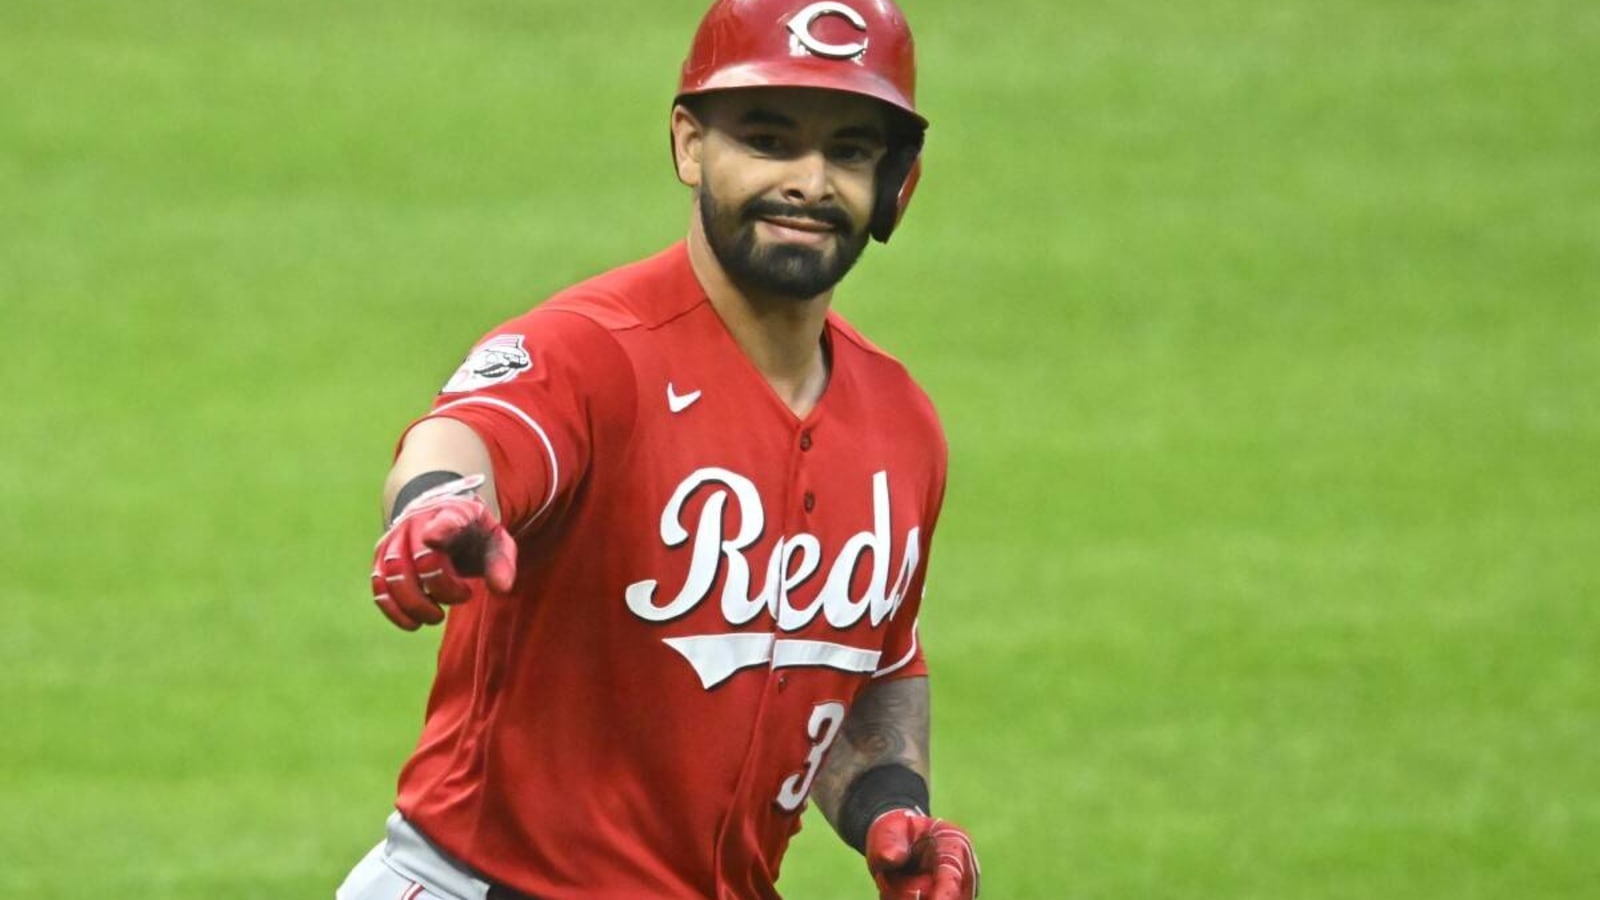 Reds Split Spring Training Matchups With White Sox and Rangers